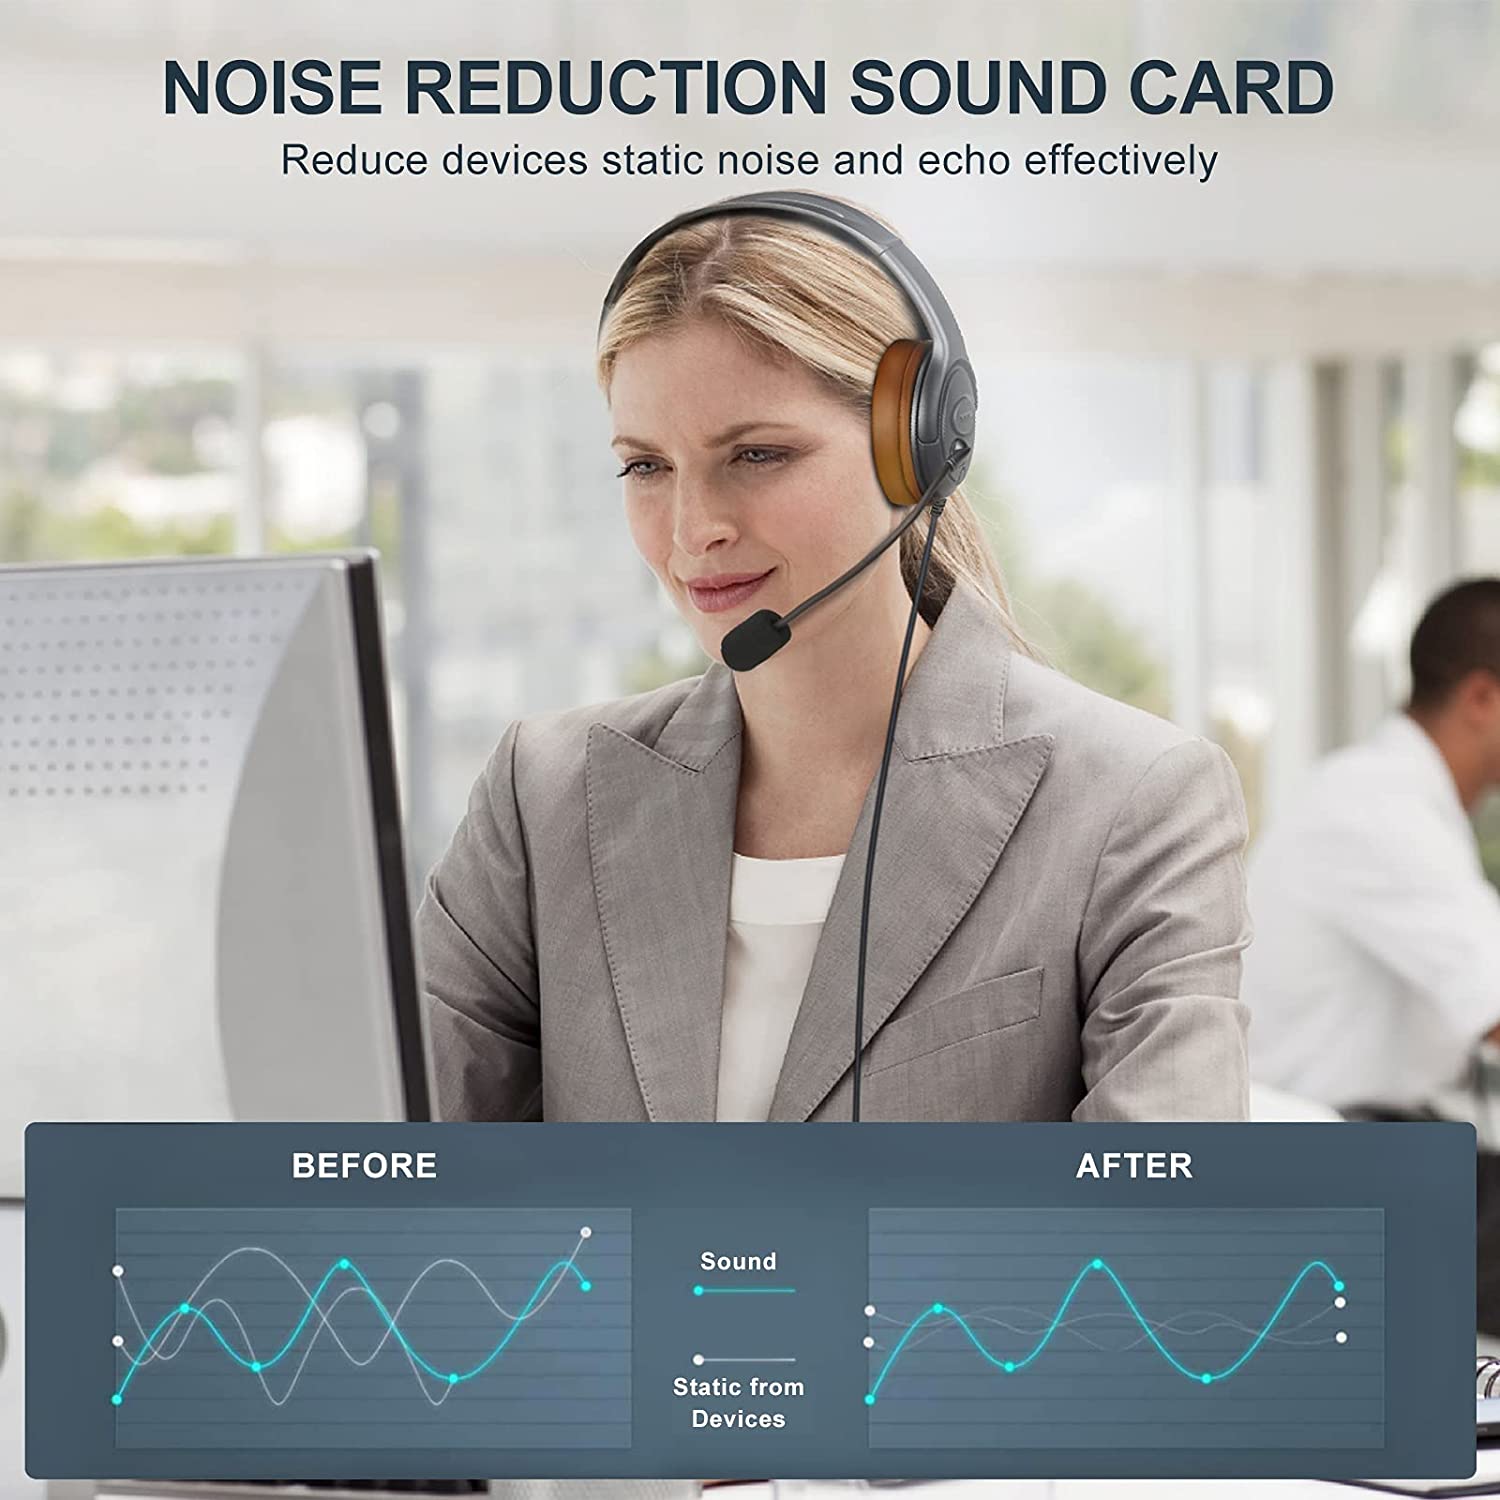 Teams Meeting Headset for Laptop Dictation Headset for Nuance Dragon Speech Recognition USB Headset for Zoom Meeting Video Conferencing USB Headset Over Ear with Mic Mute Button Volume Control Gold 